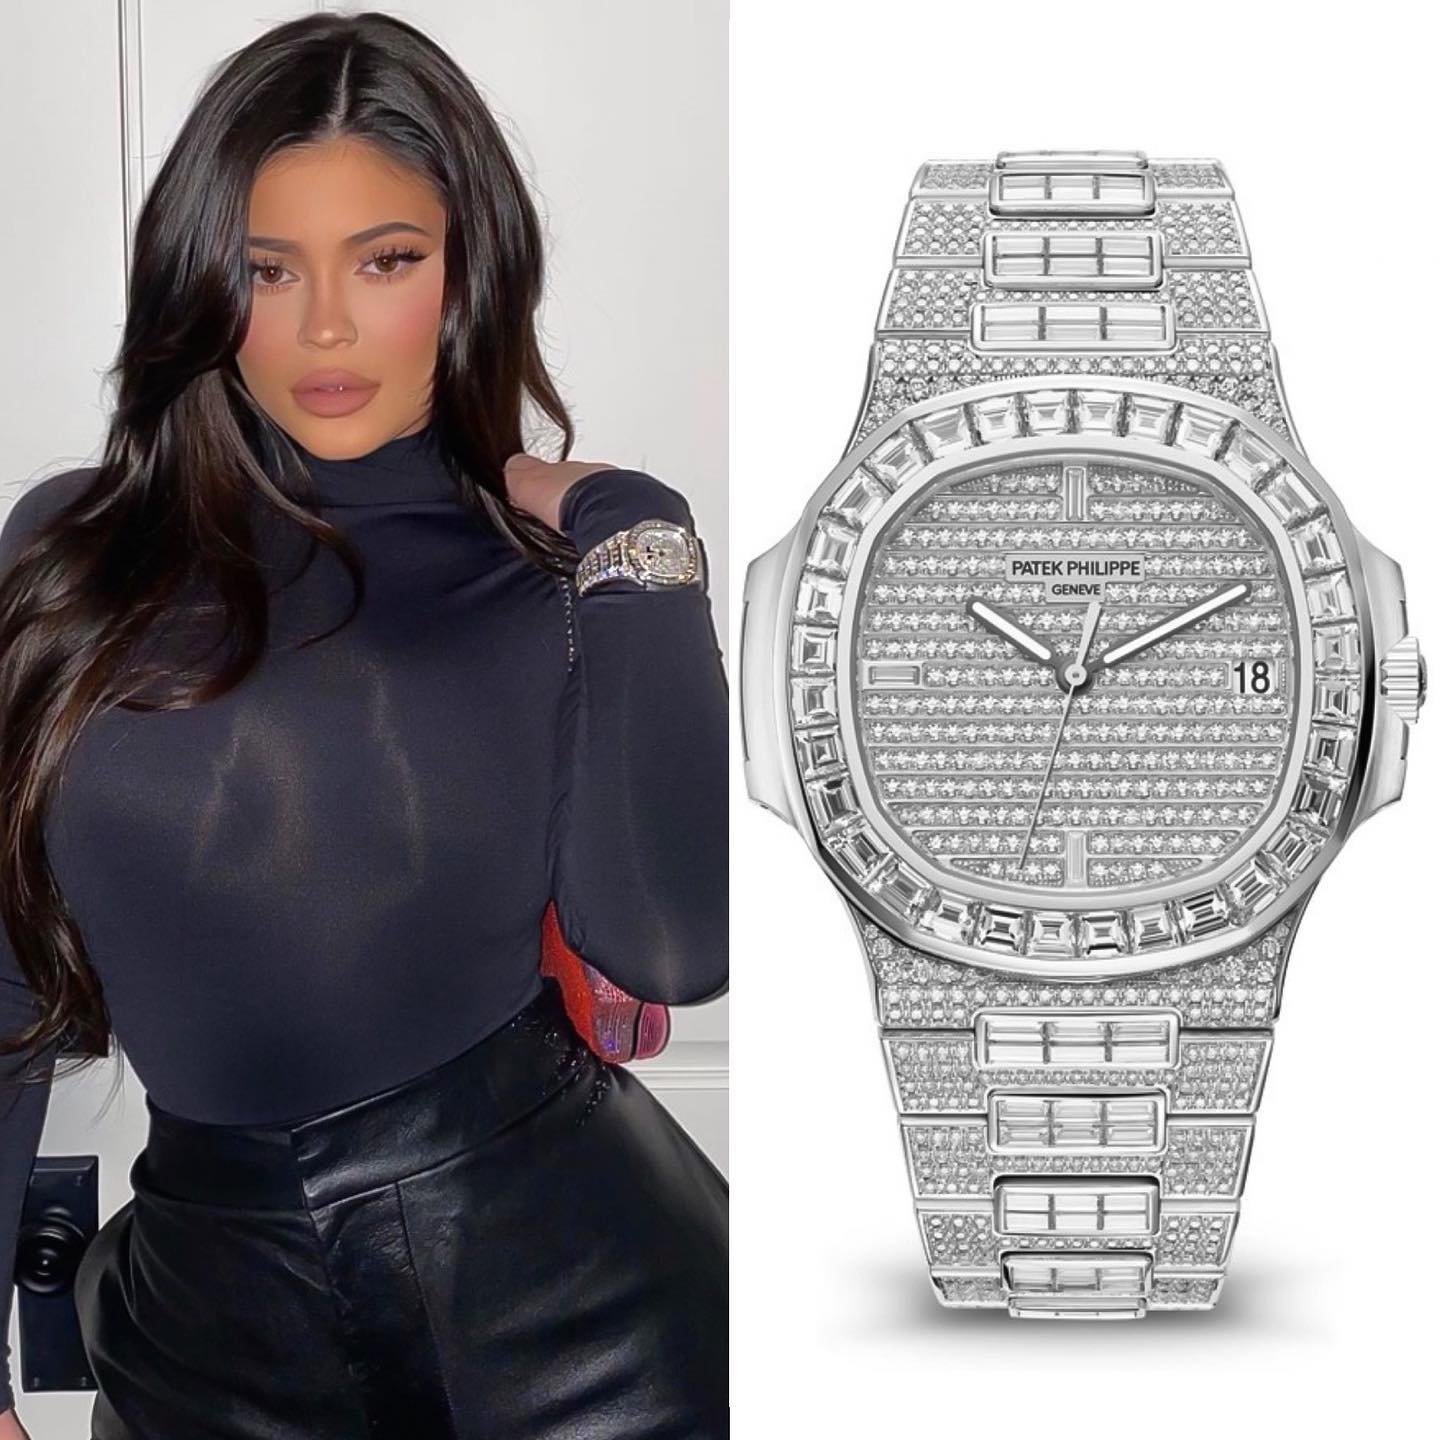 Billionaire lady @kyliejenner here wearing the super blinged Silver Dial @patekphilippe 5719/10G-010 set with totally 1,343 diamonds & 18.73 carat According to Forbes, at just 21, Jenner is worth 1 BILLION DOLLARS, and her cosmetics company, "Kylie Cosmetics", is valued at 900 million. ️ 453,600.00 🌐 📸 @superwatchman